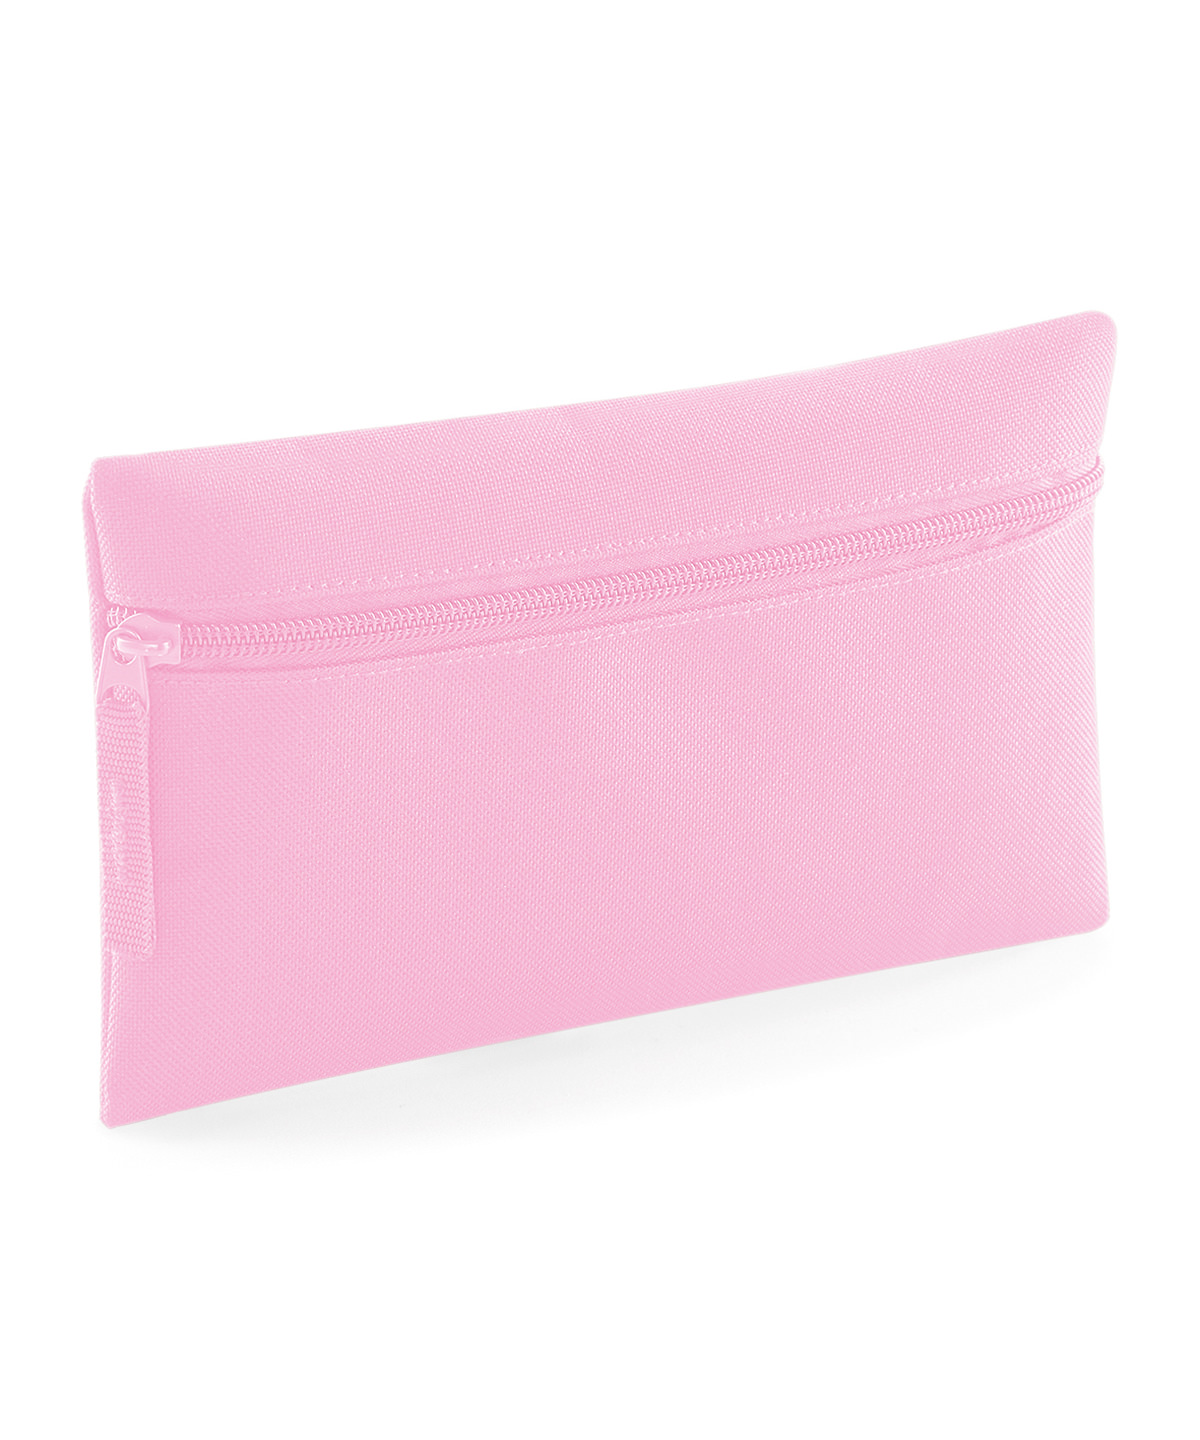 Pencil Case Classic Pink Size One Size